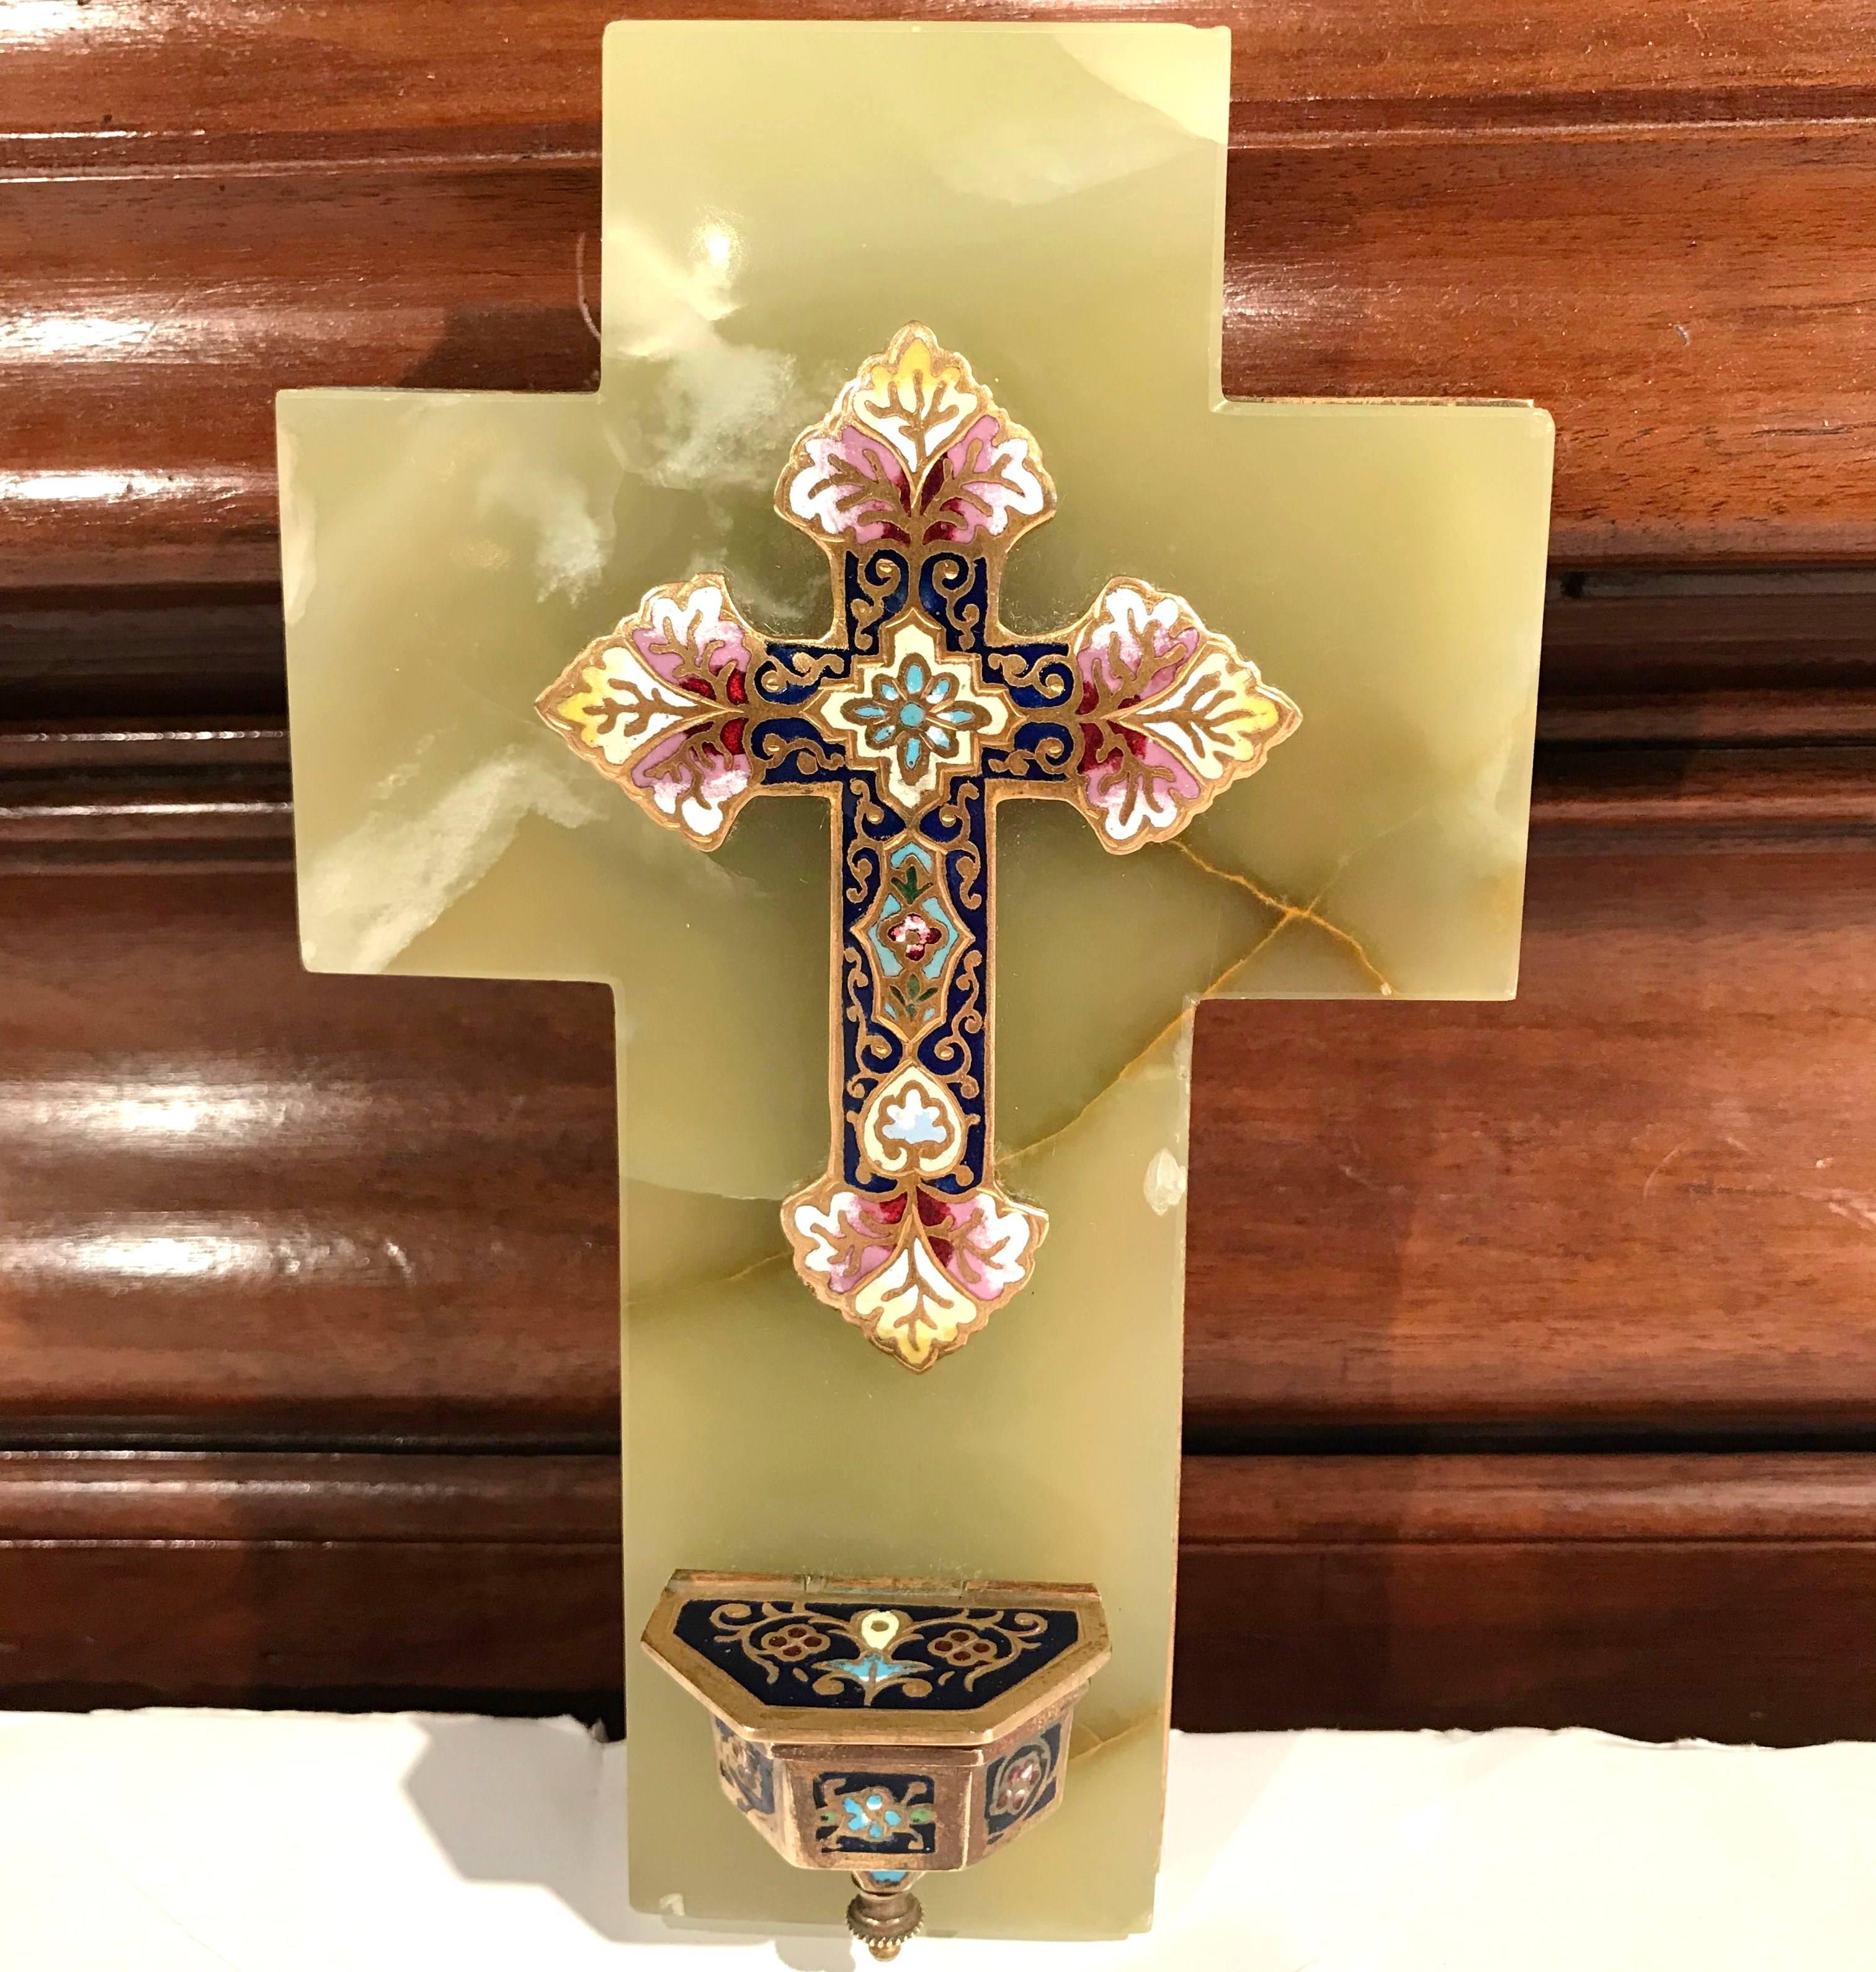 Cloissoné 19th Century French Green Marble Cross and Holy Water with Cloisonné Technique